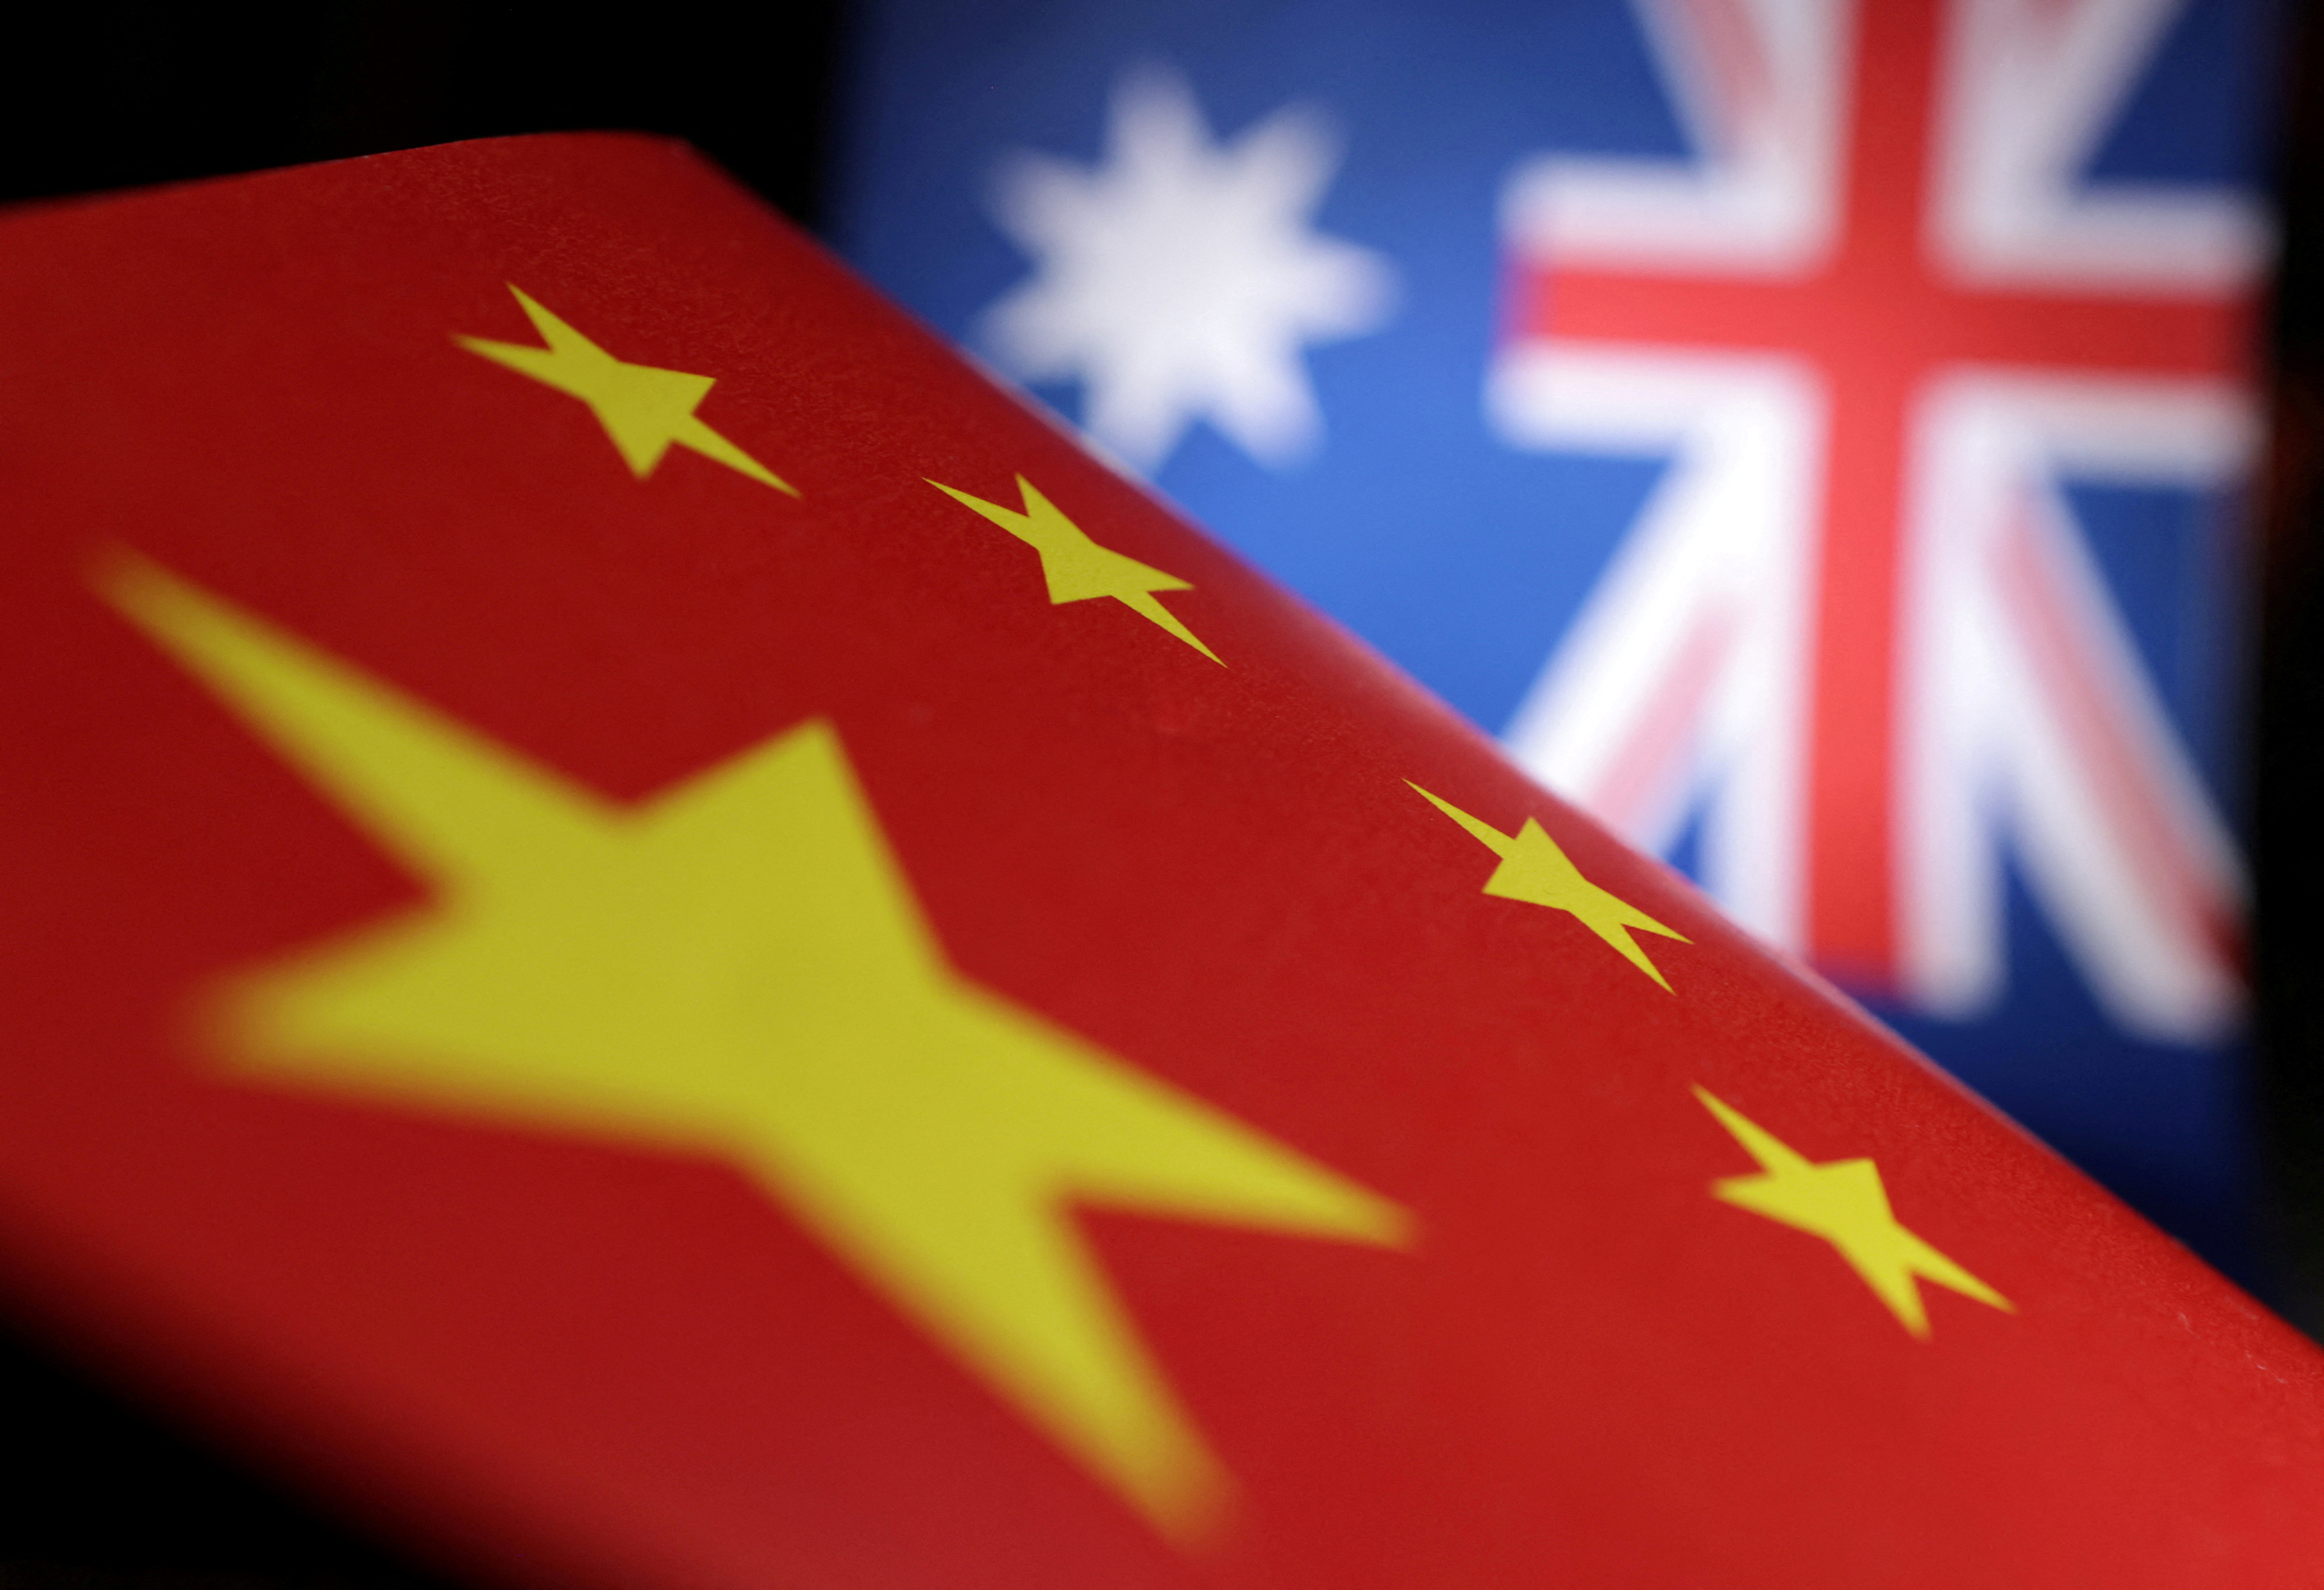 Illustration shows printed Chinese and Australian flags